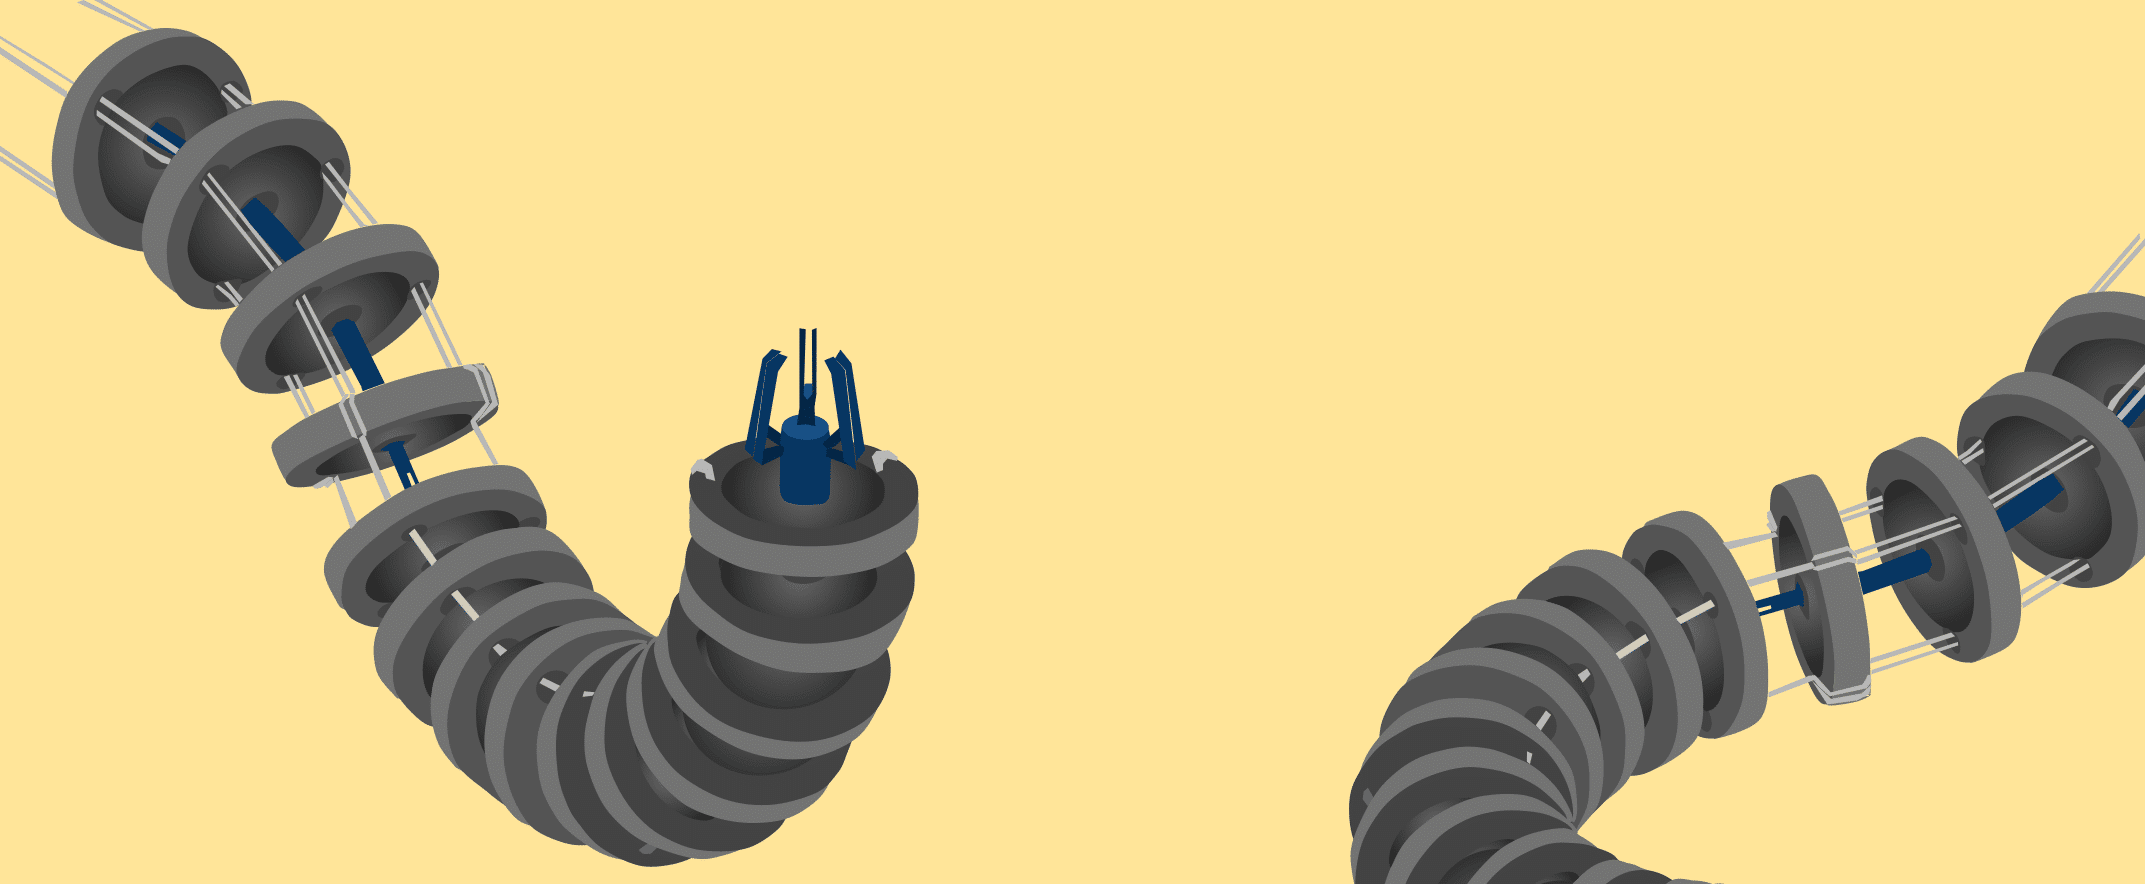 banner illustration of a continuum robot